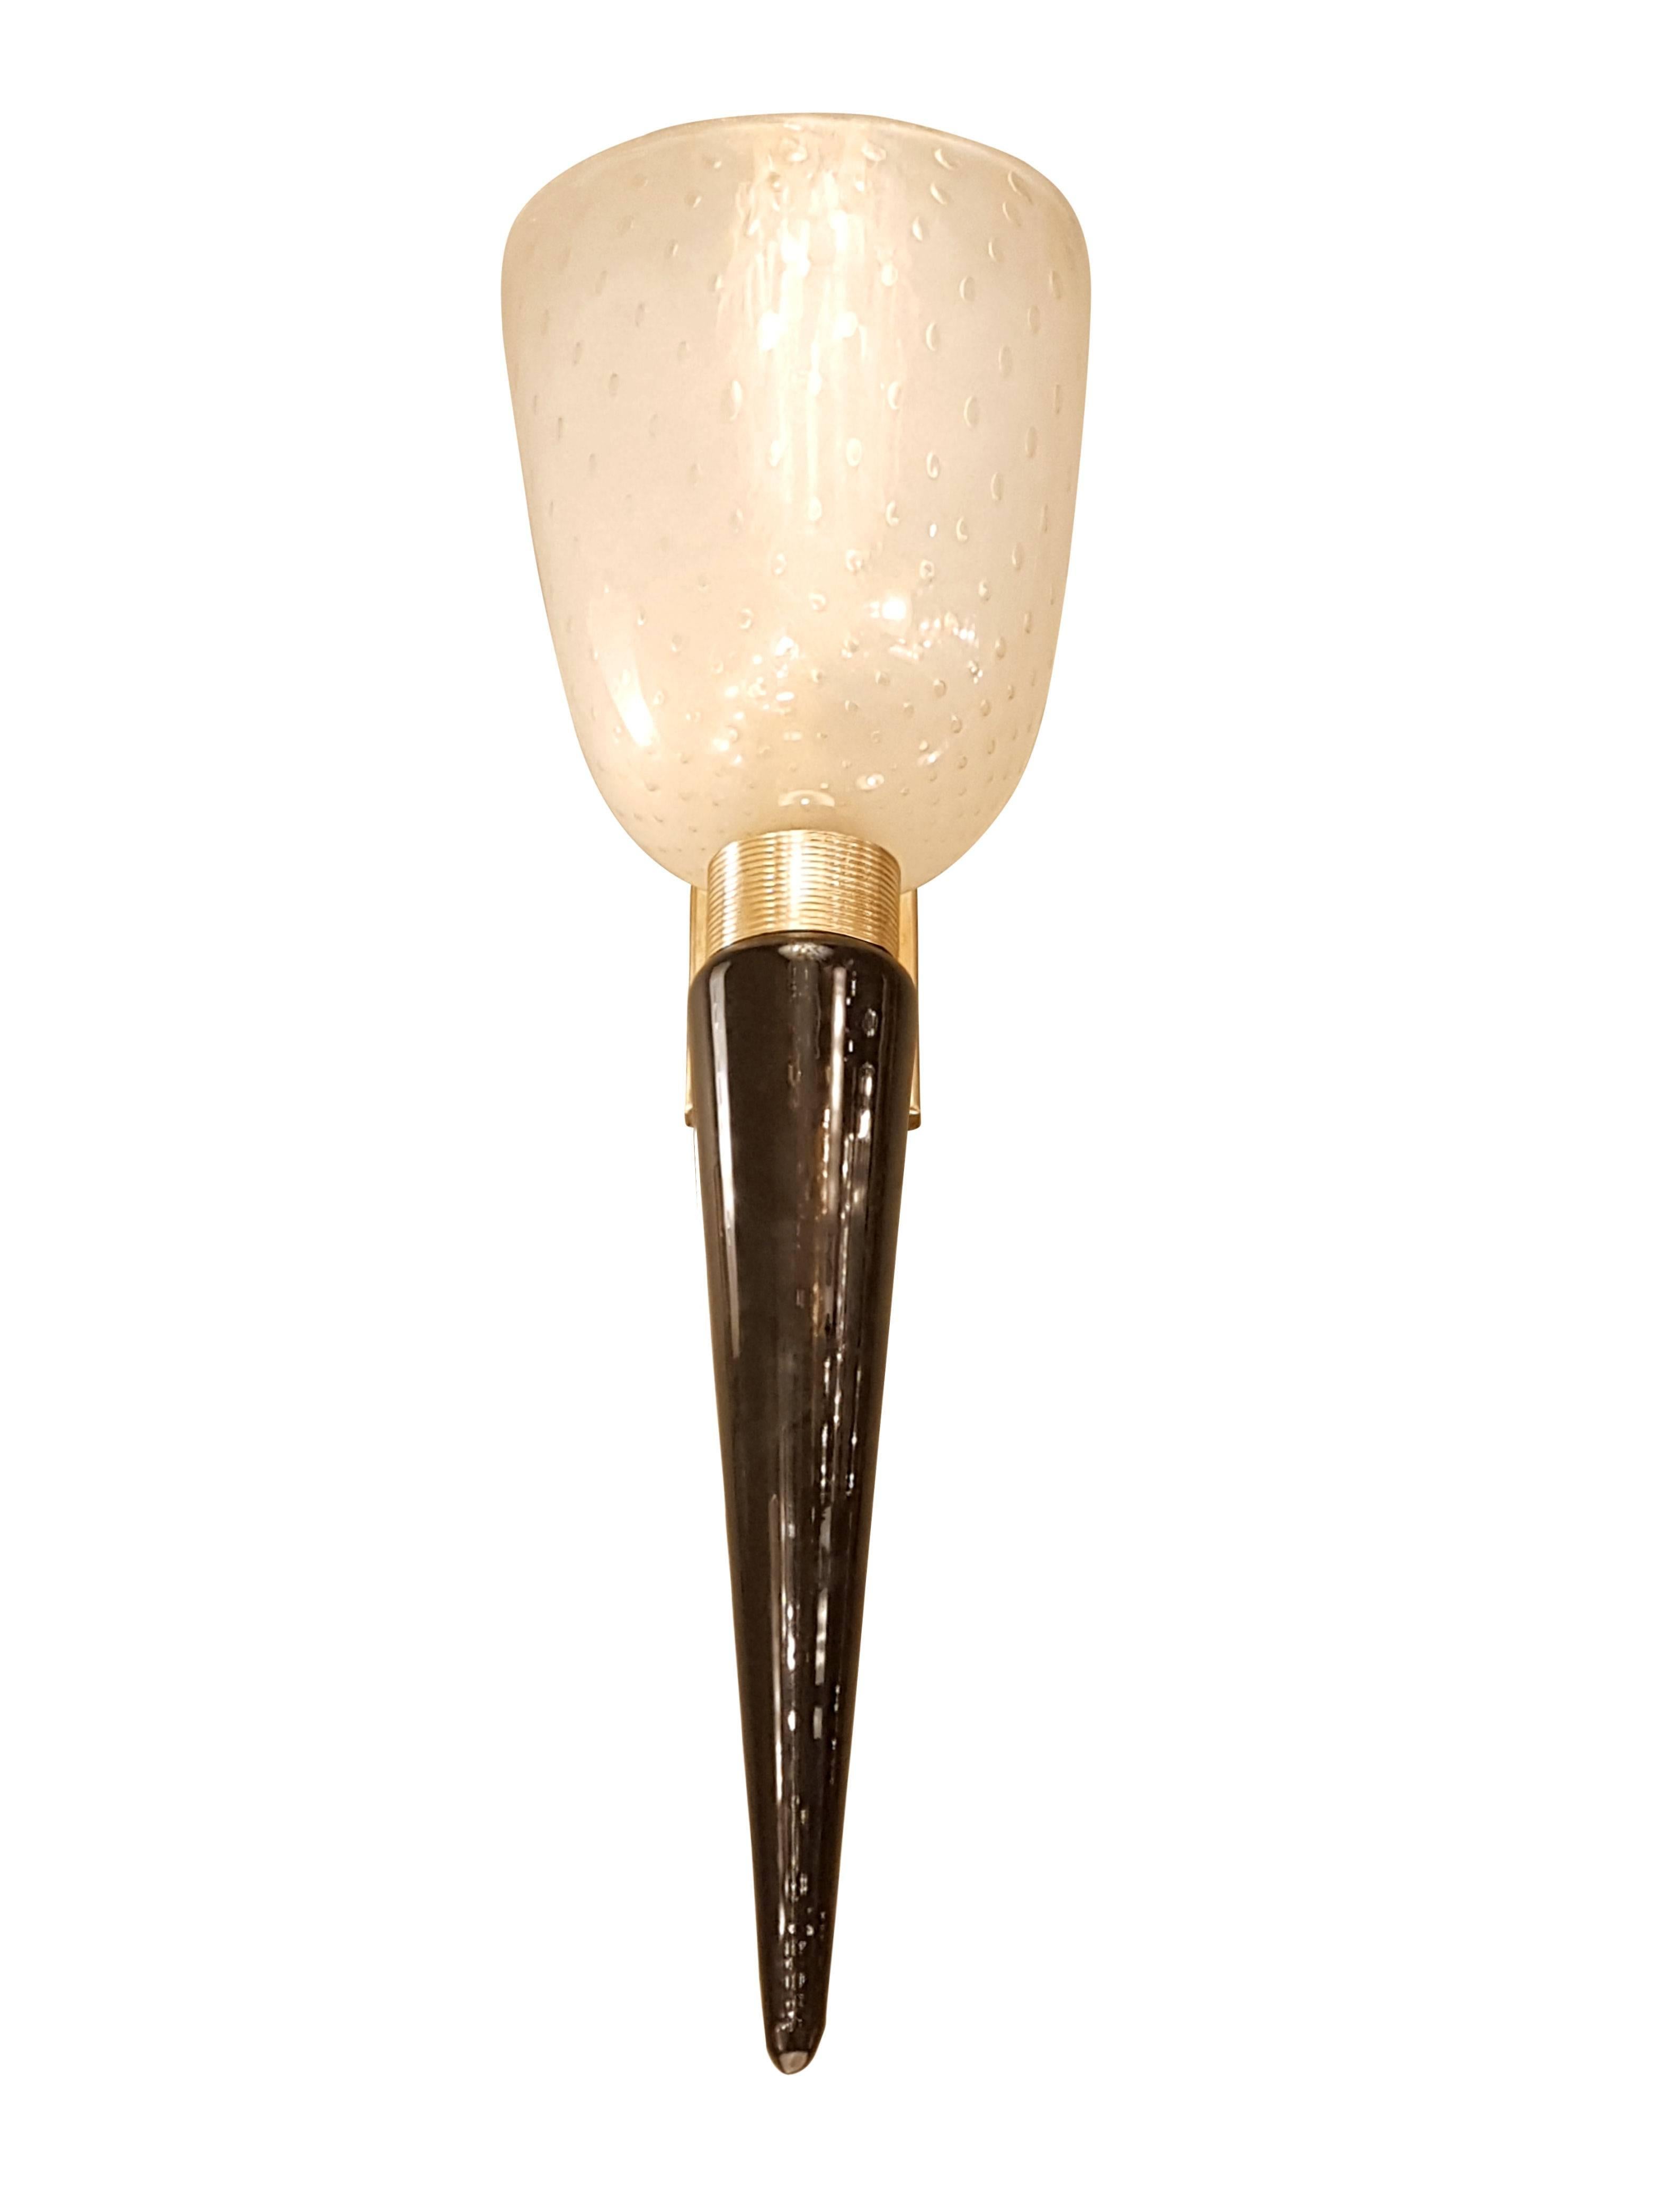 Pair of Seguso Italian Mid-Century Modern Murano glass sconces.
Brass mounts, with nice patina, one medium base light each, rewired.
They have a black opaque Murano glass stem, and a top Bullicante technique vase, containing the light.
Bullicante